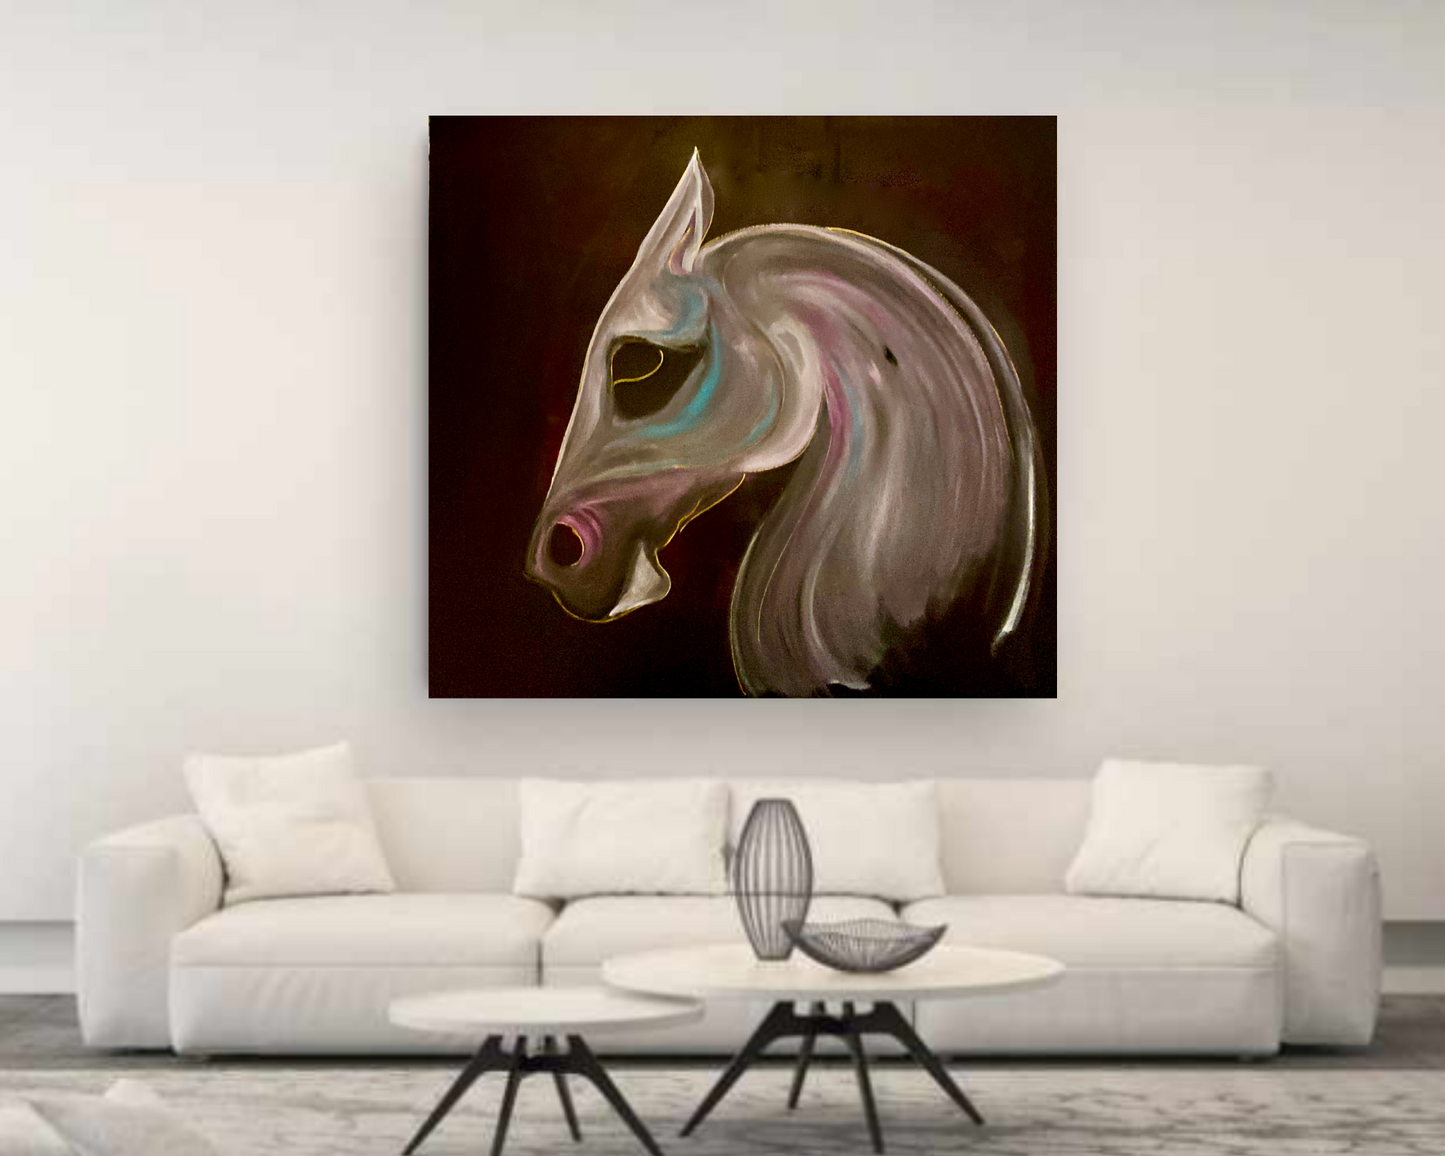 The Horse - SOLD